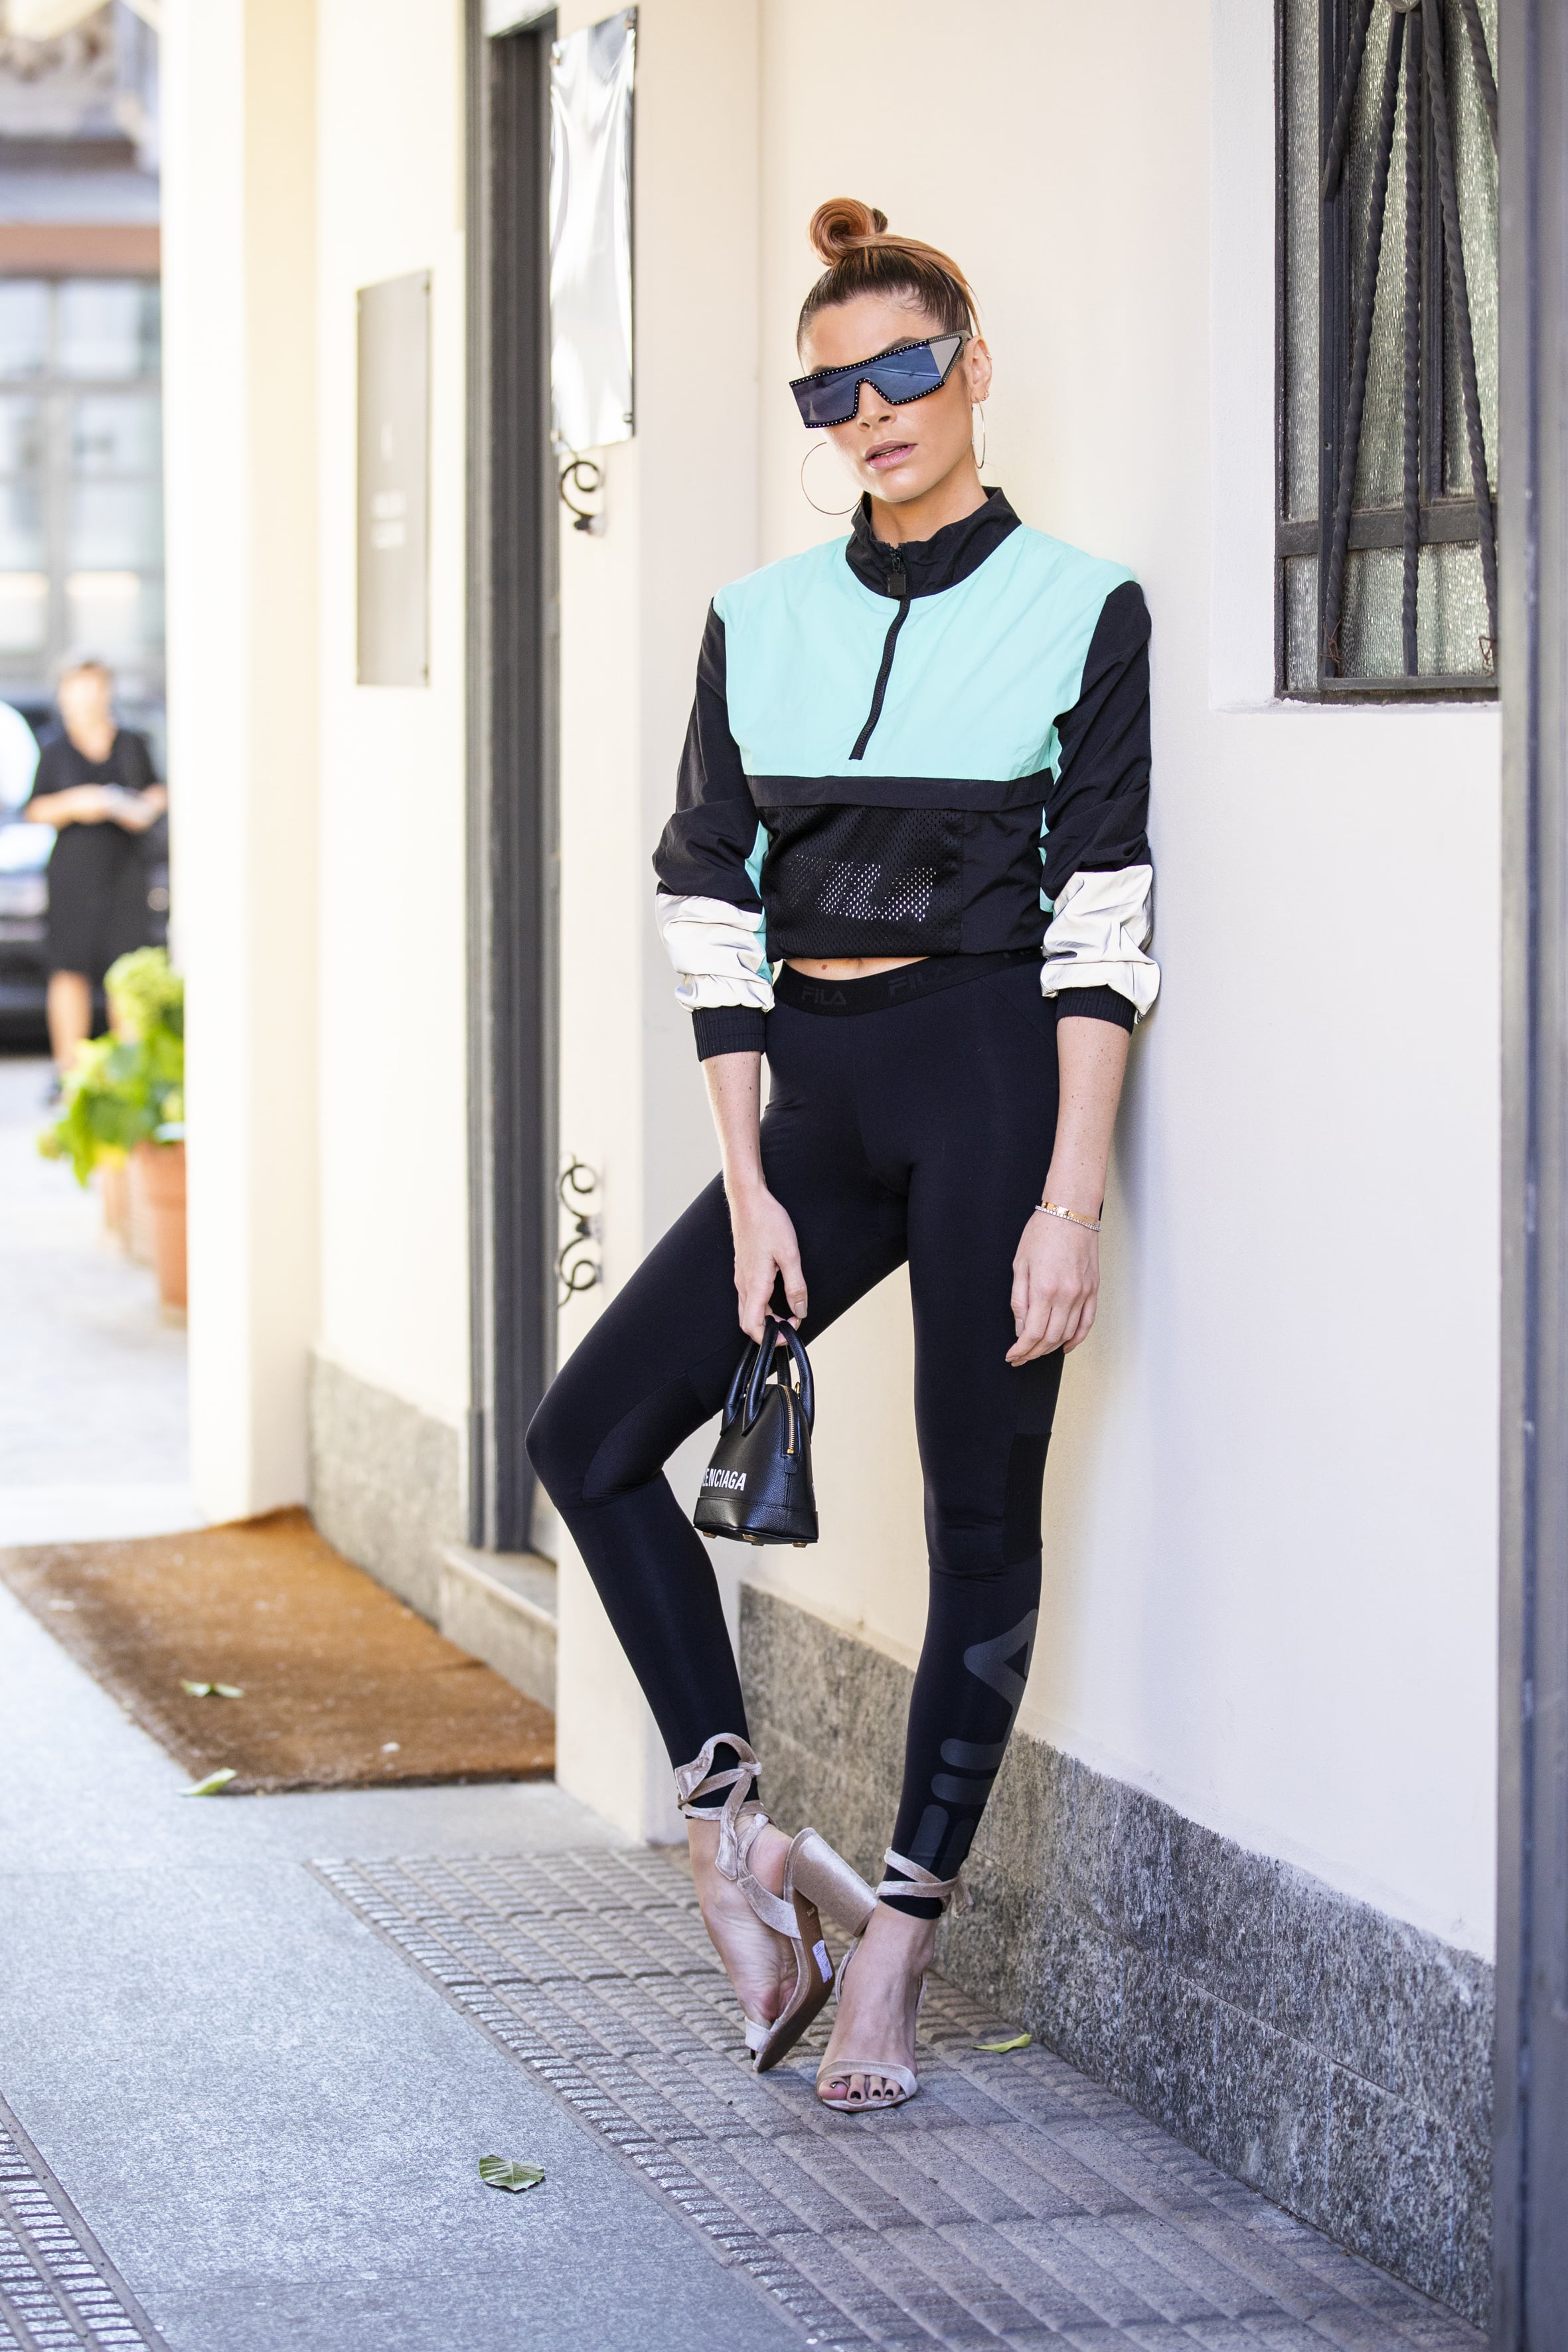 6 Legging Outfits the Fashion Crowd Will Embrace for the Rest of 2021   Outfits with leggings, Colored leggings outfit, Leggings outfit spring